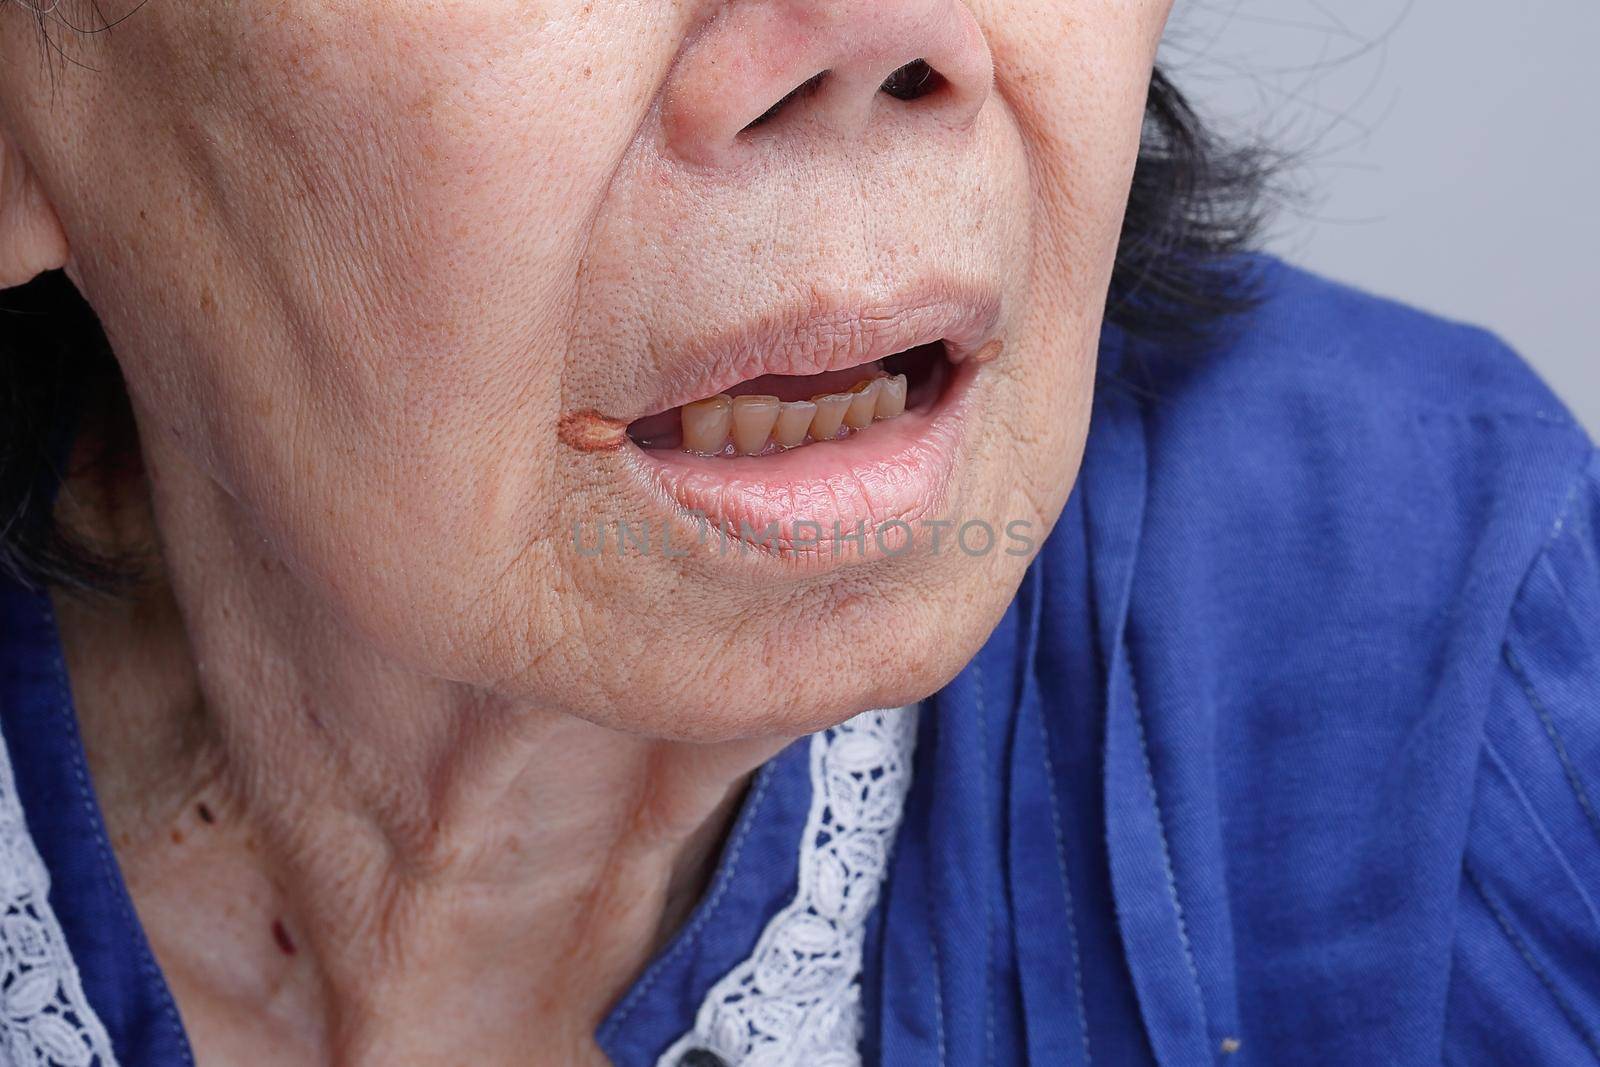 Angular cheilitis is a type of common inflammation of the lips by toa55